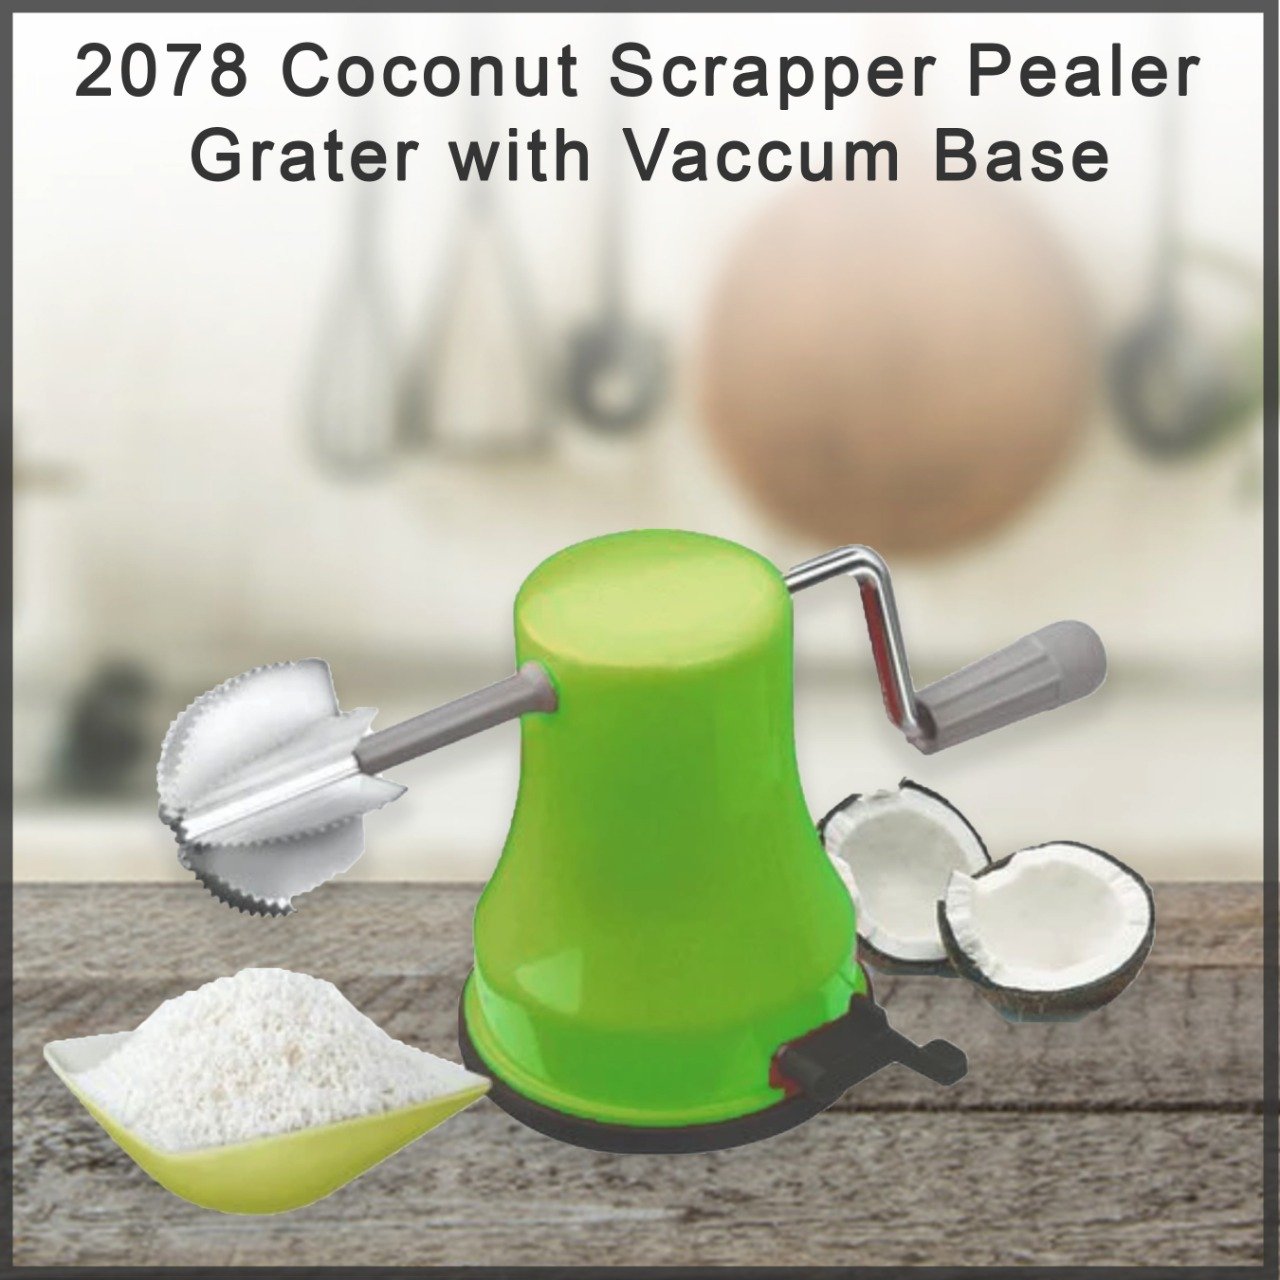 2078 Coconut Scrapper Pealer Grater with Vaccum Base - SkyShopy